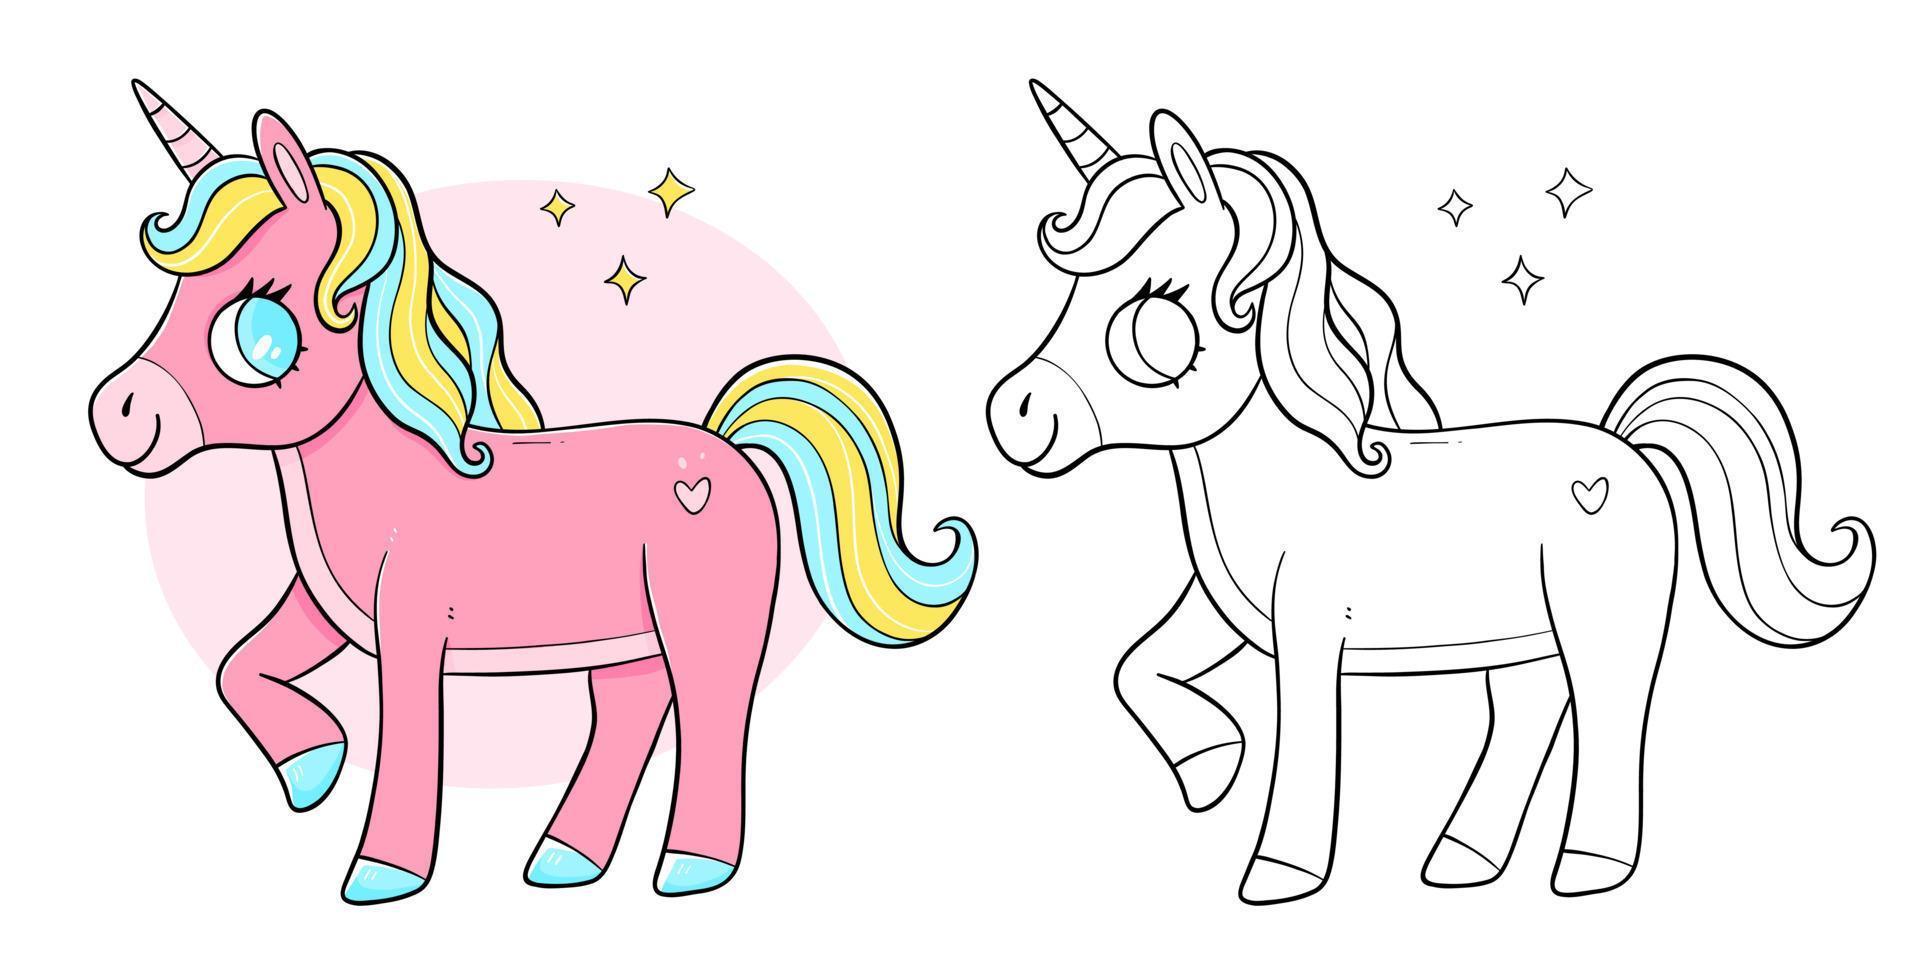 Unicorn coloring book with coloring example for kids. Coloring page with horse unicorn. Monochrome and color version. Vector children's illustration.